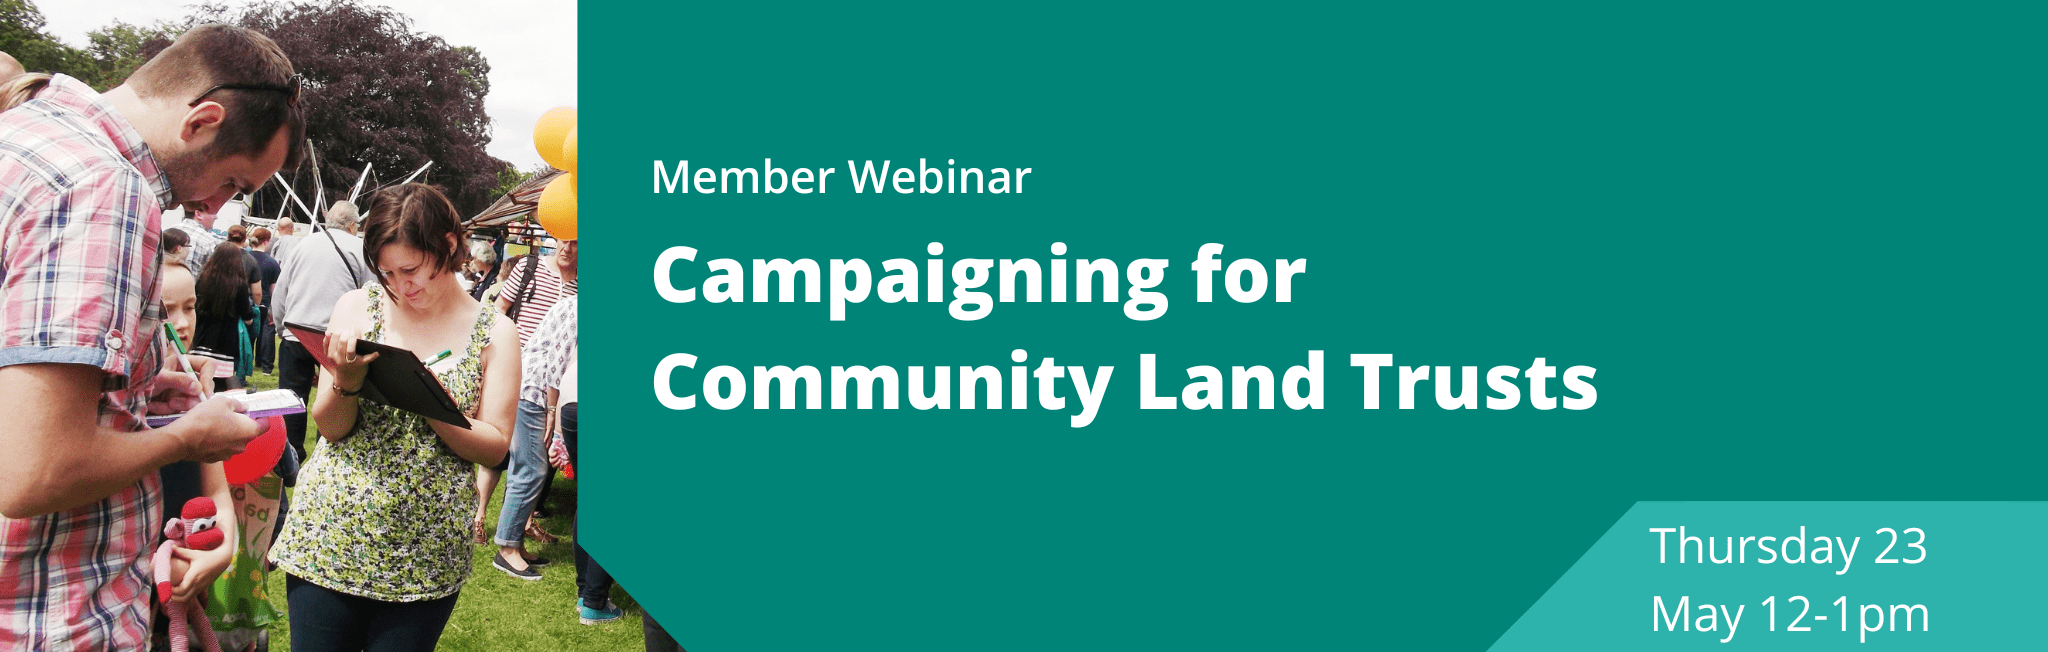 Image reads member webinar Campaigning for Community Land Trusts 23 May 12-1pm